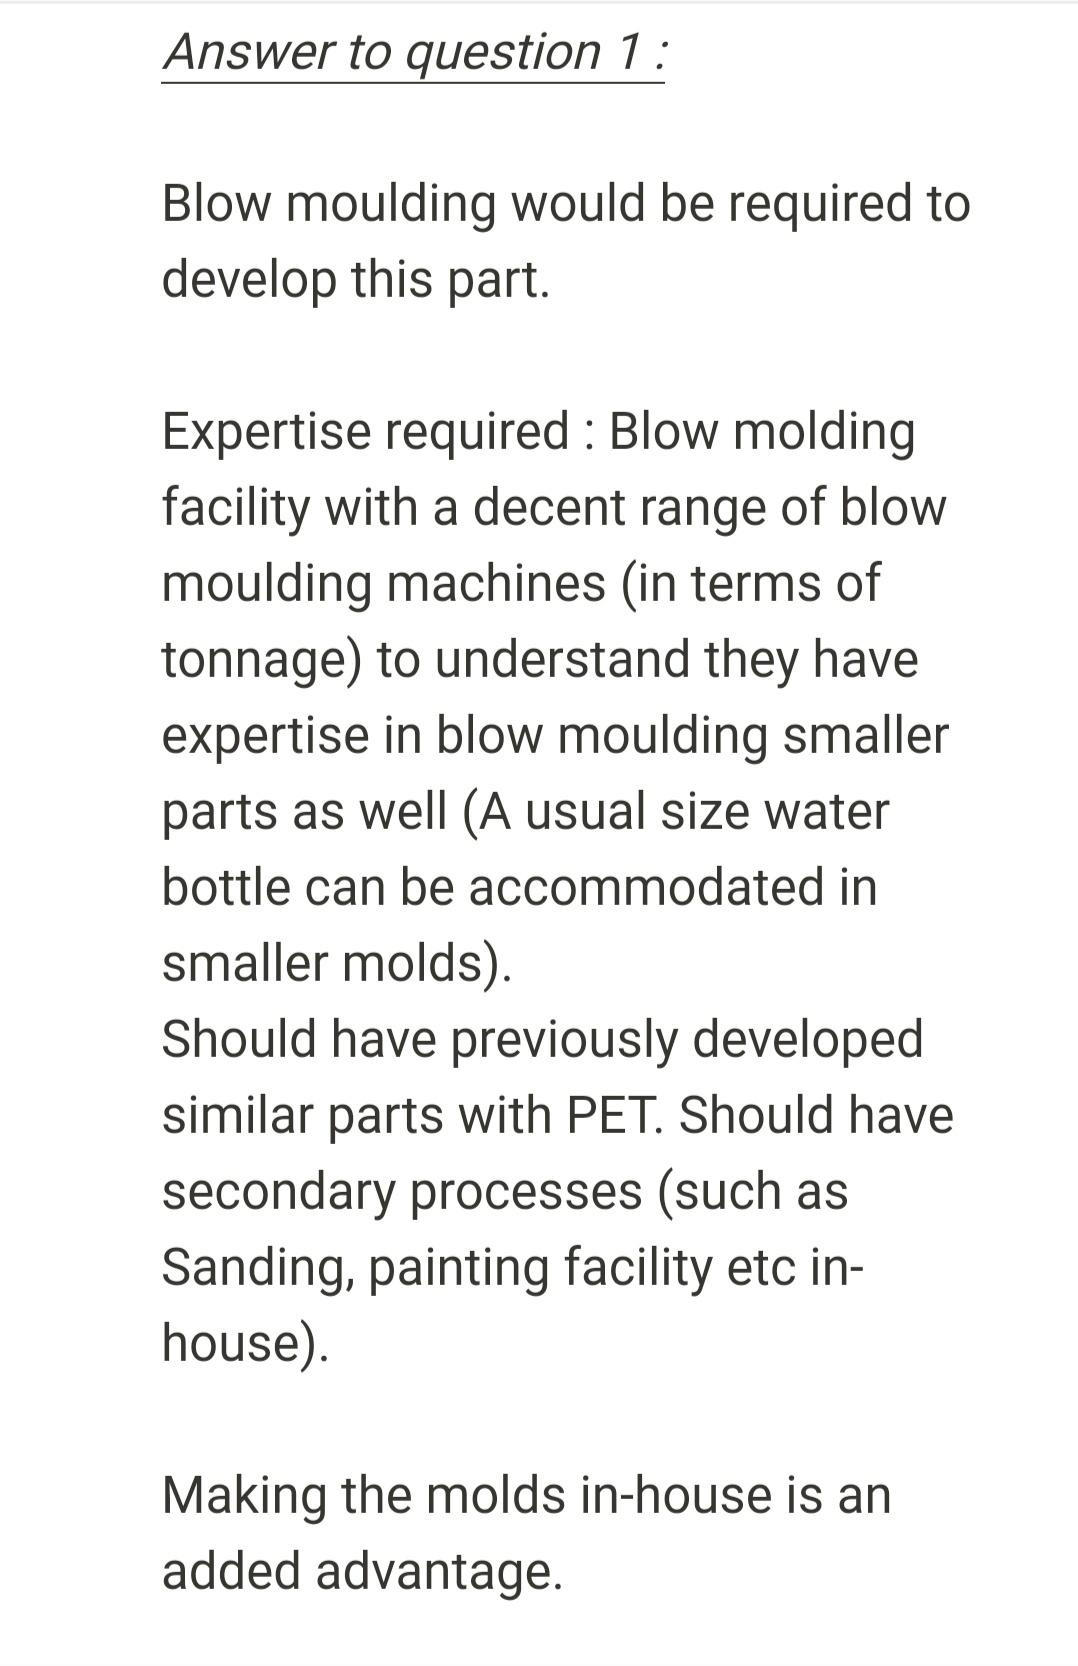 Answer to question 1: Blow moulding would be required to develop this part. Expertise required: Blow molding